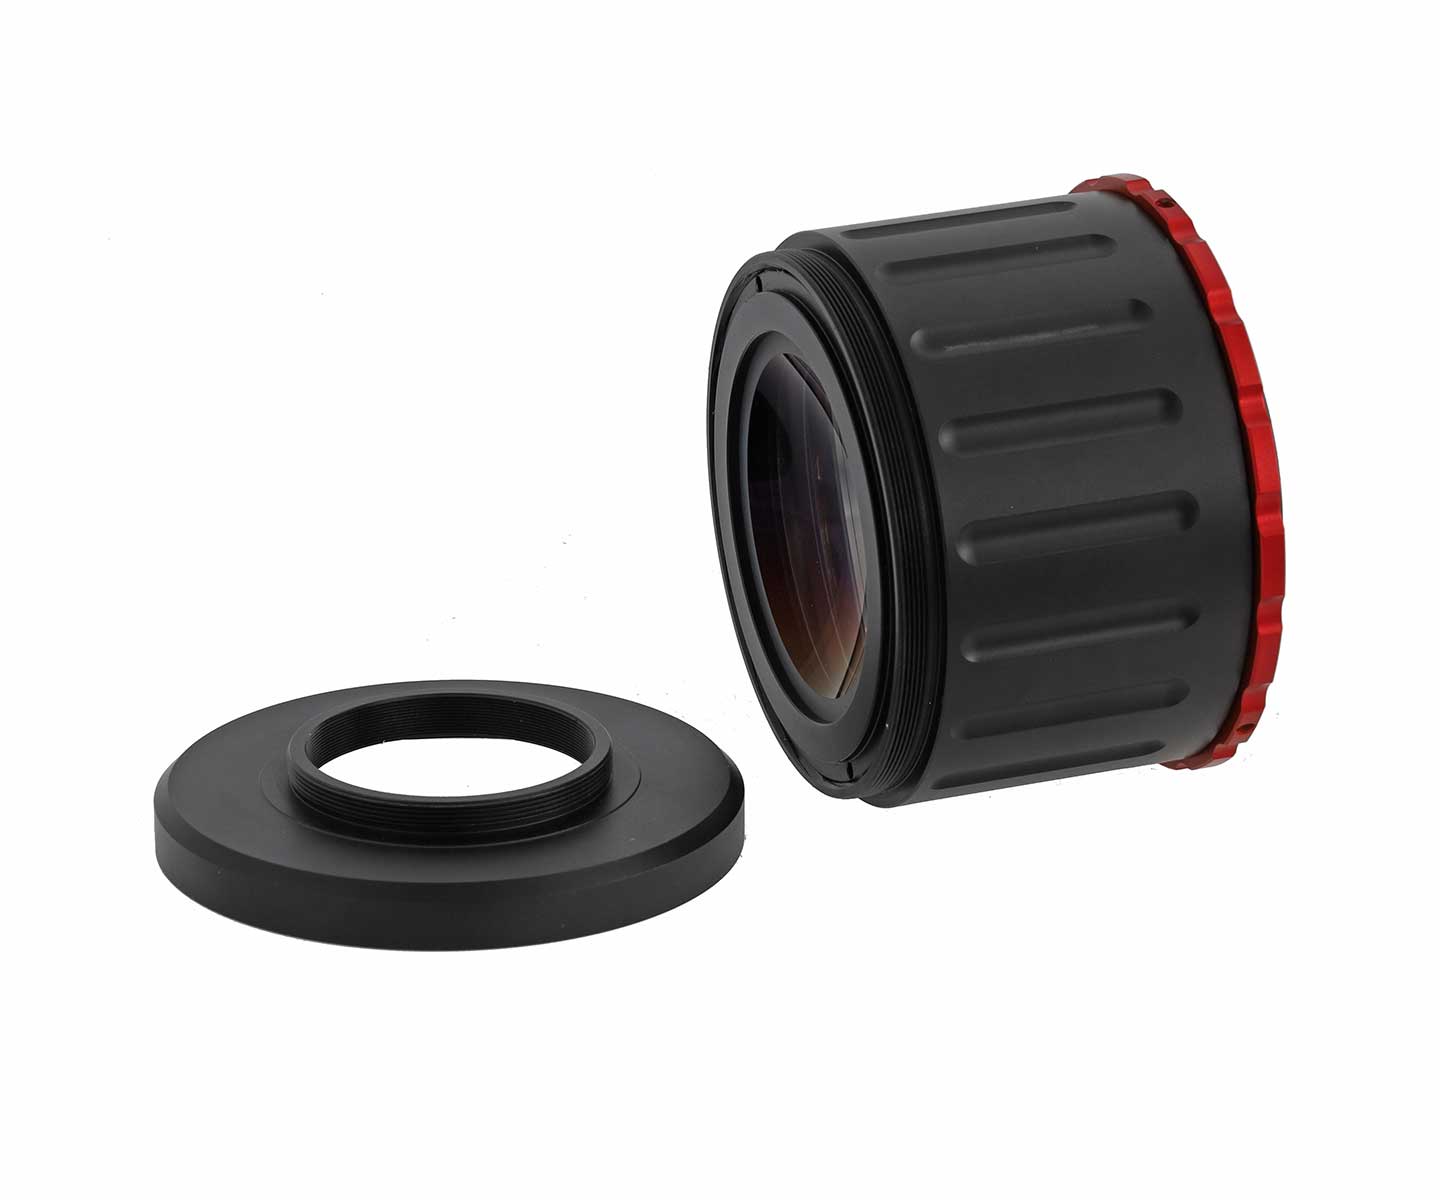  TS PHOTOLINE 106 mm f/6.6 triplet apochromat with color-clean imaging including 0.75x 3-element full-frame corrector for astrophotography [EN] 